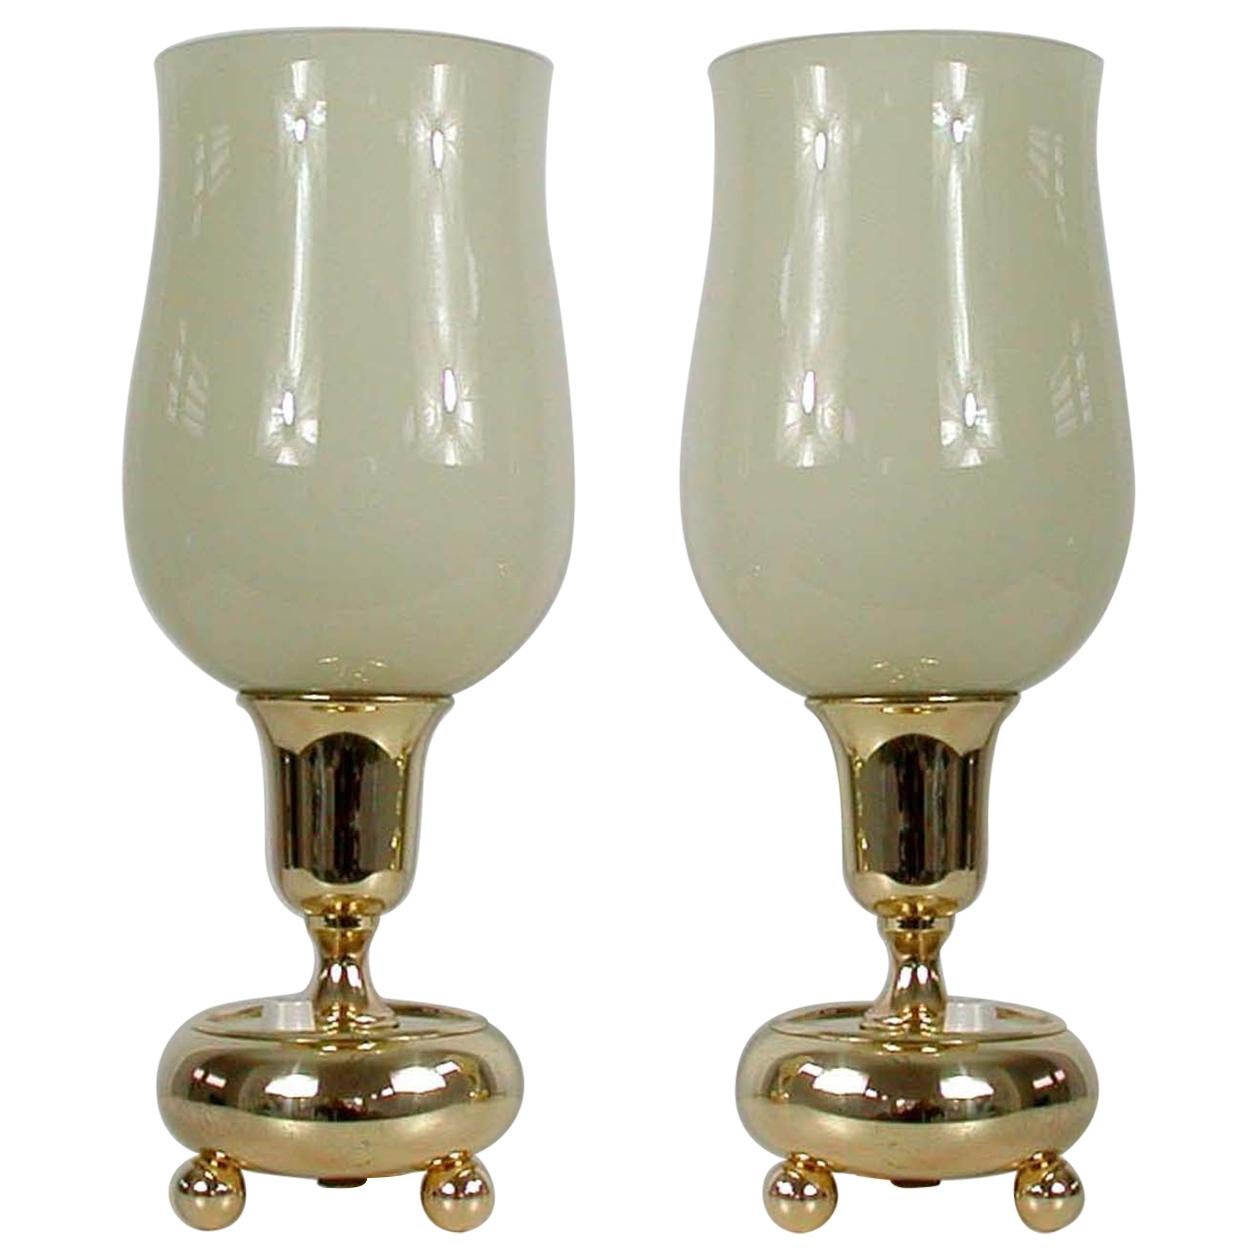 German Bauhaus Brass and Opal Torchiere Table Lamps, Set of 2, 1930s